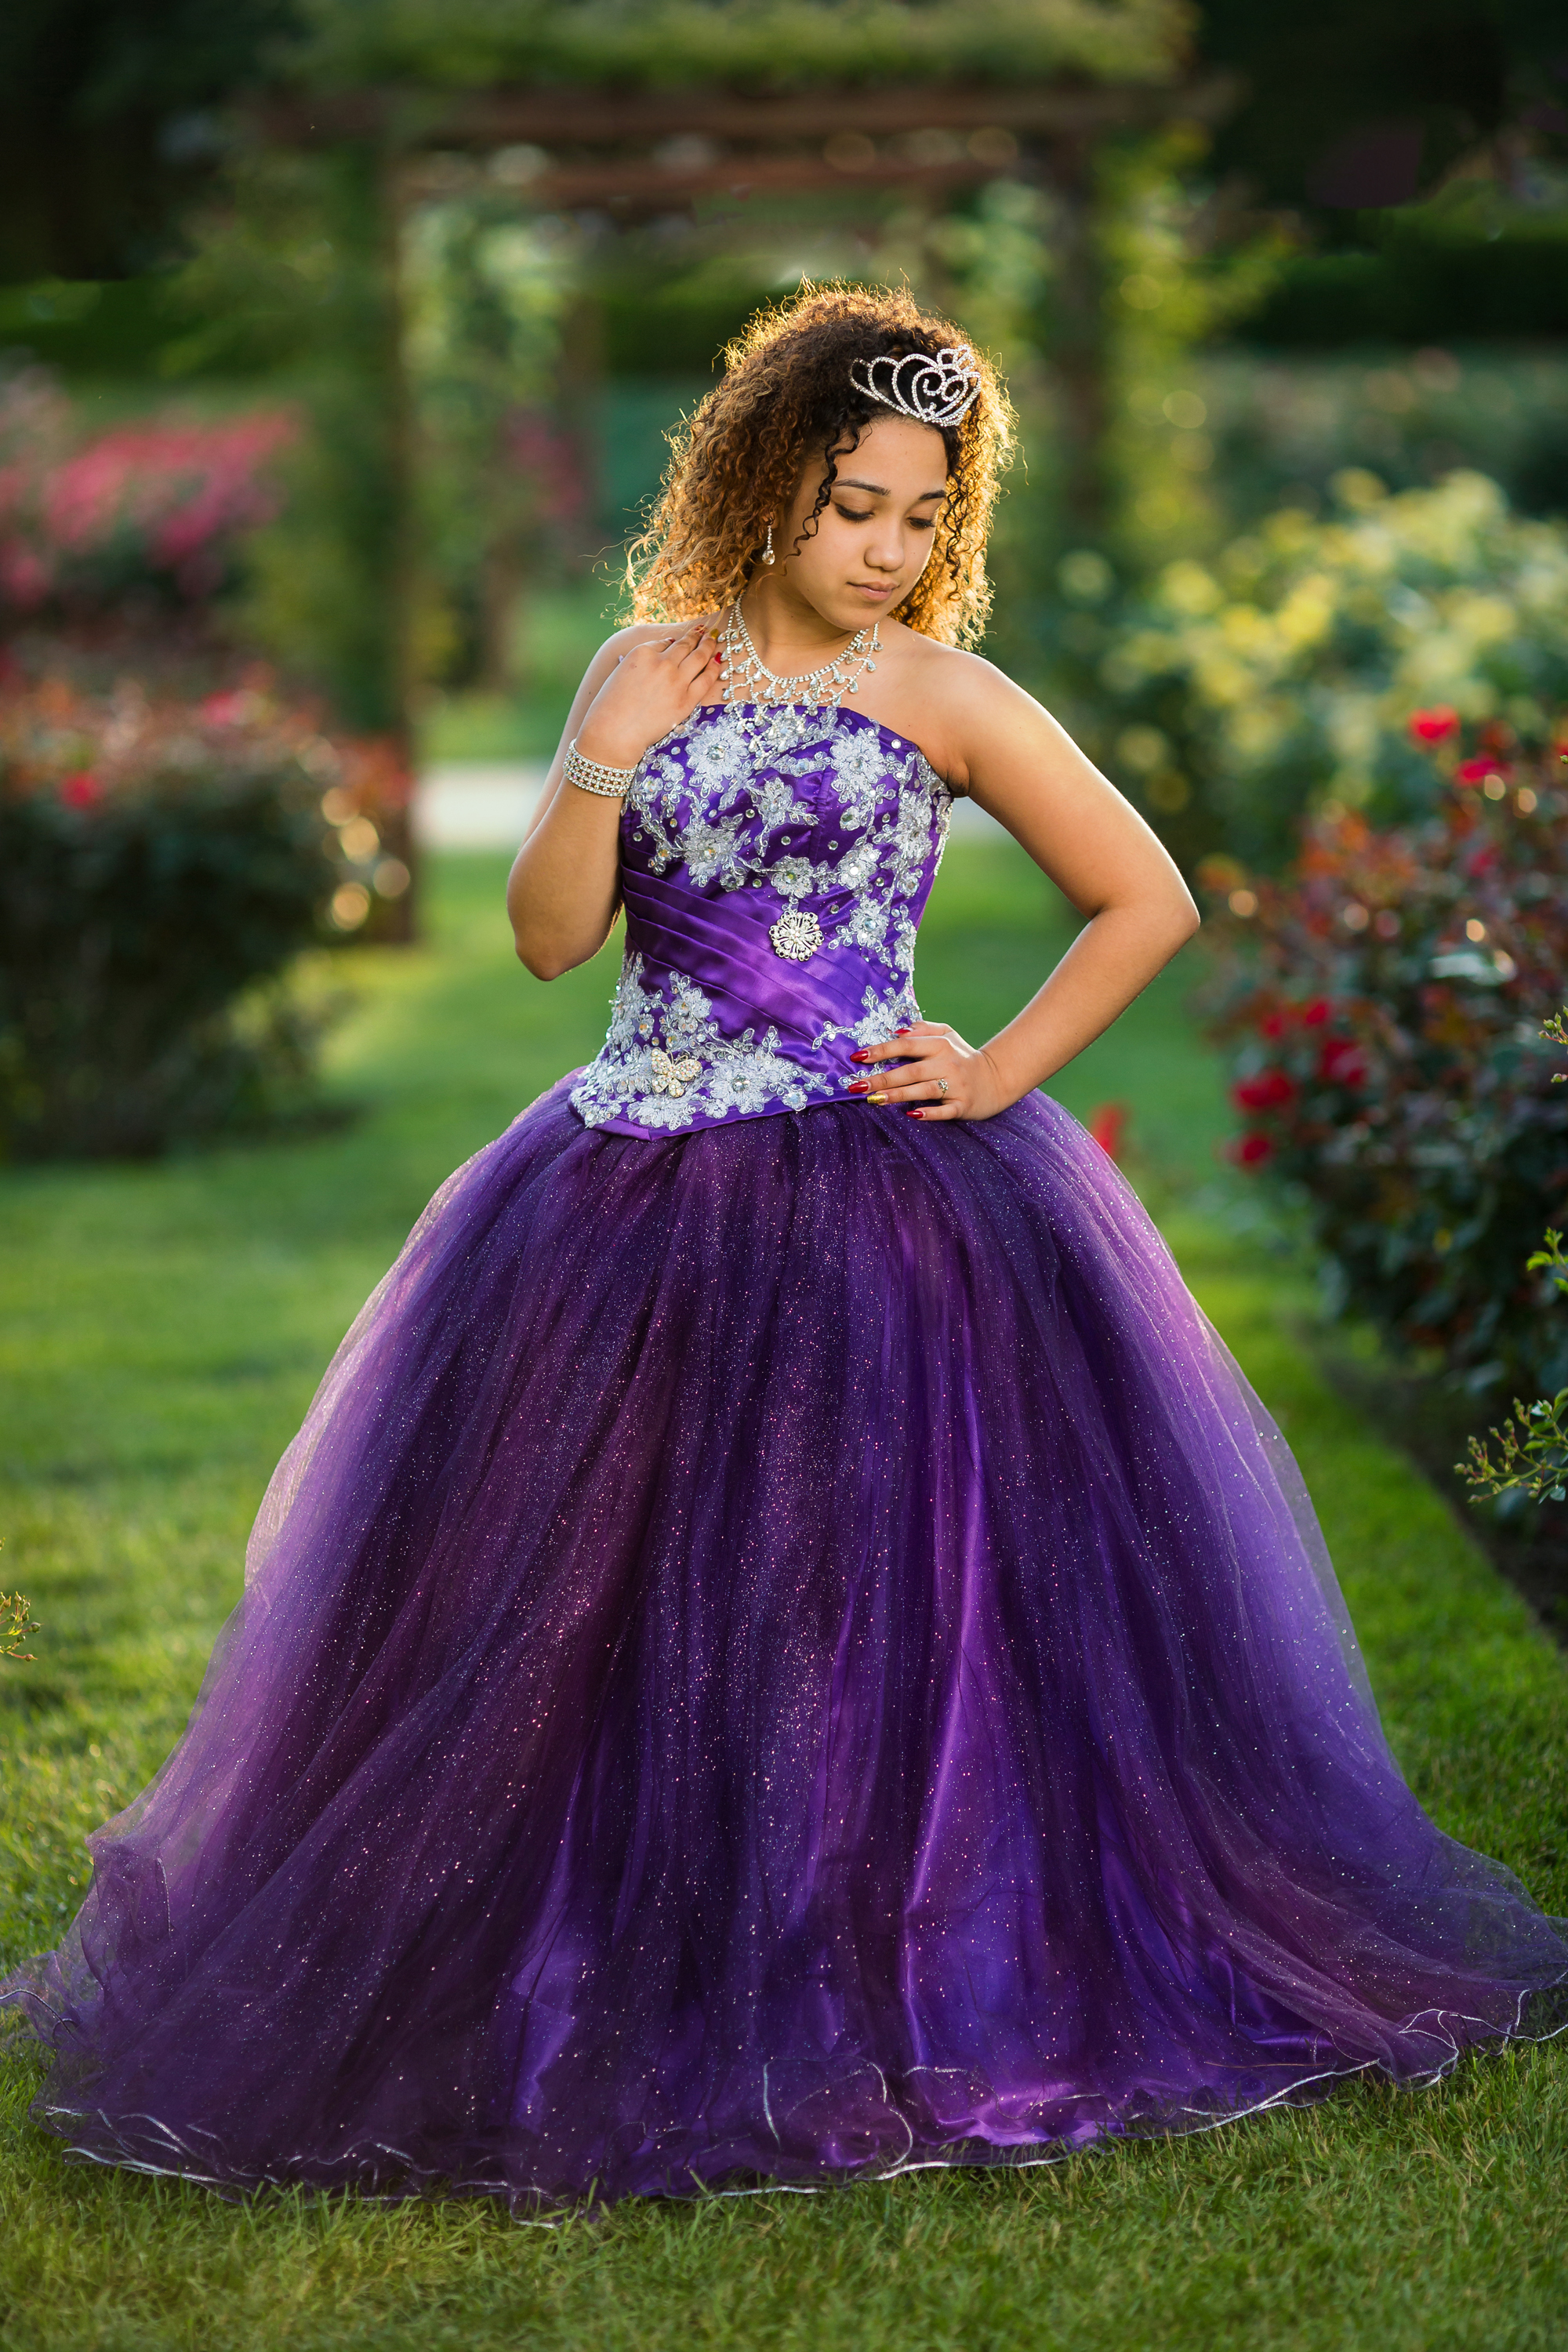 Natalias-Quince-Session-Garcia-Photography-2201.jpg